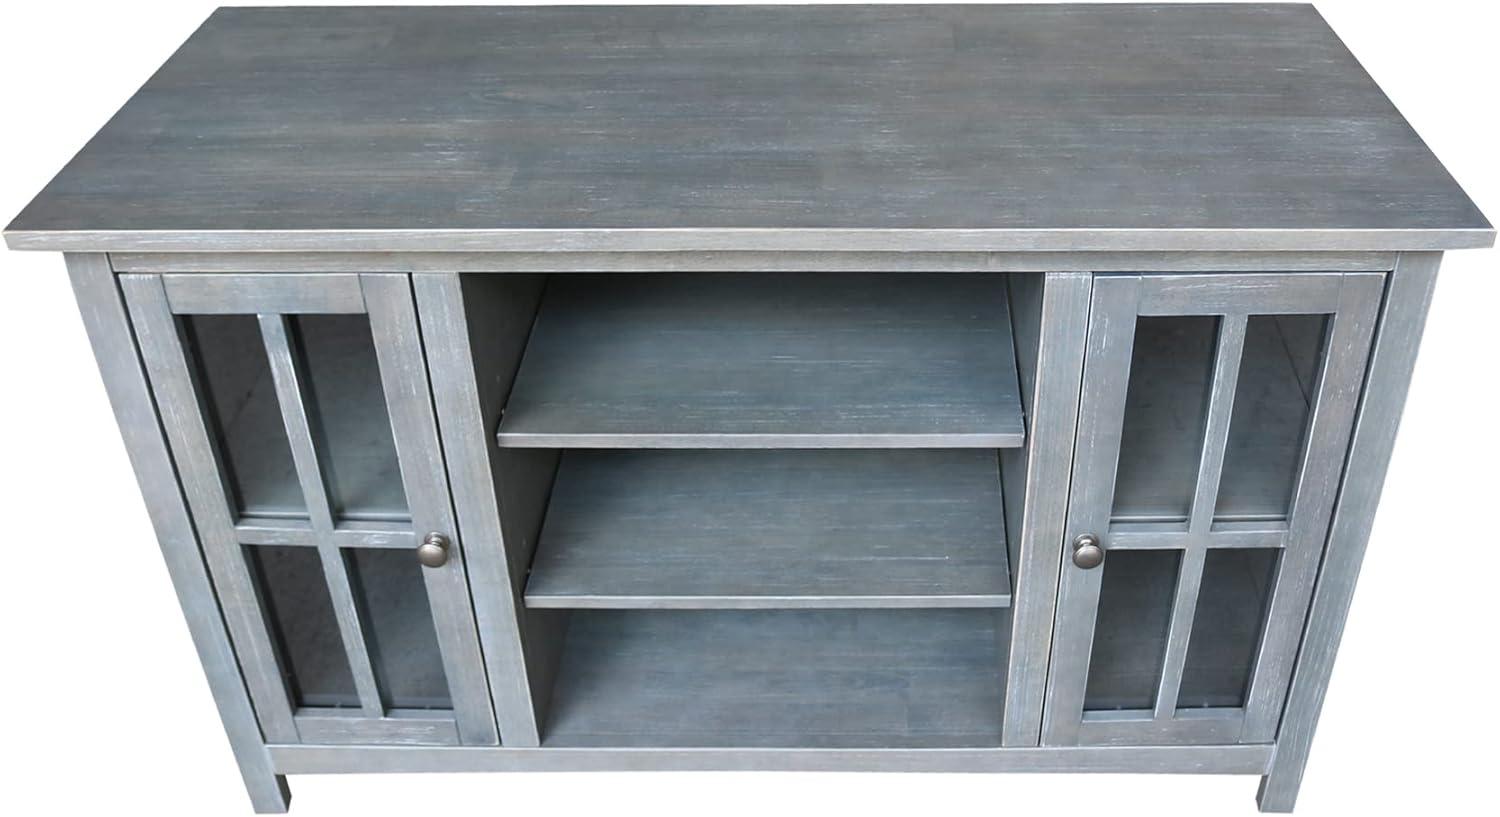 Heather Grey-Antique Solid Wood TV Stand with Cabinet Storage